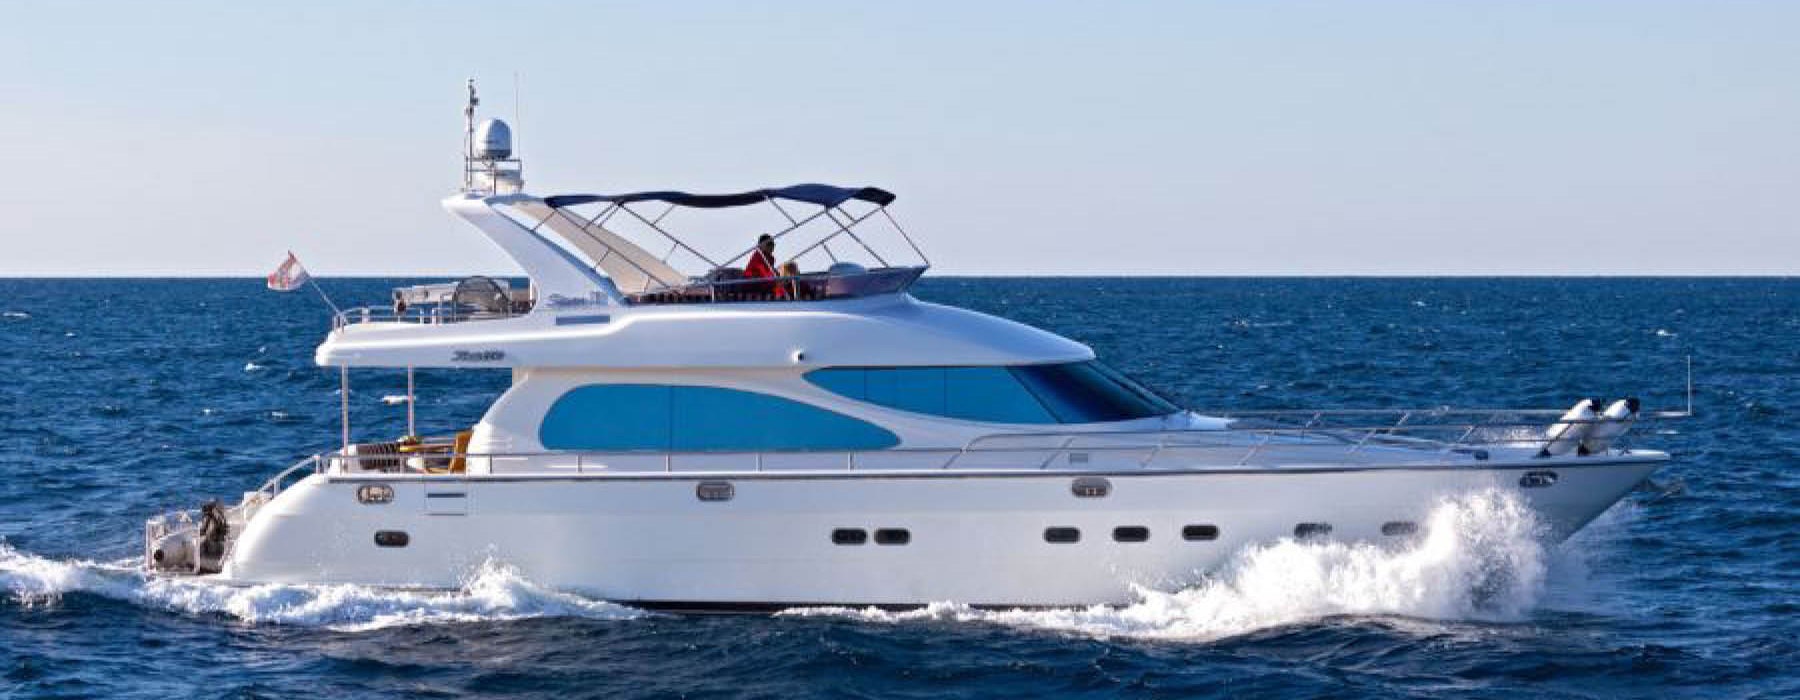 Mira Mare, Yaretti - luxury yacht for sale and charter